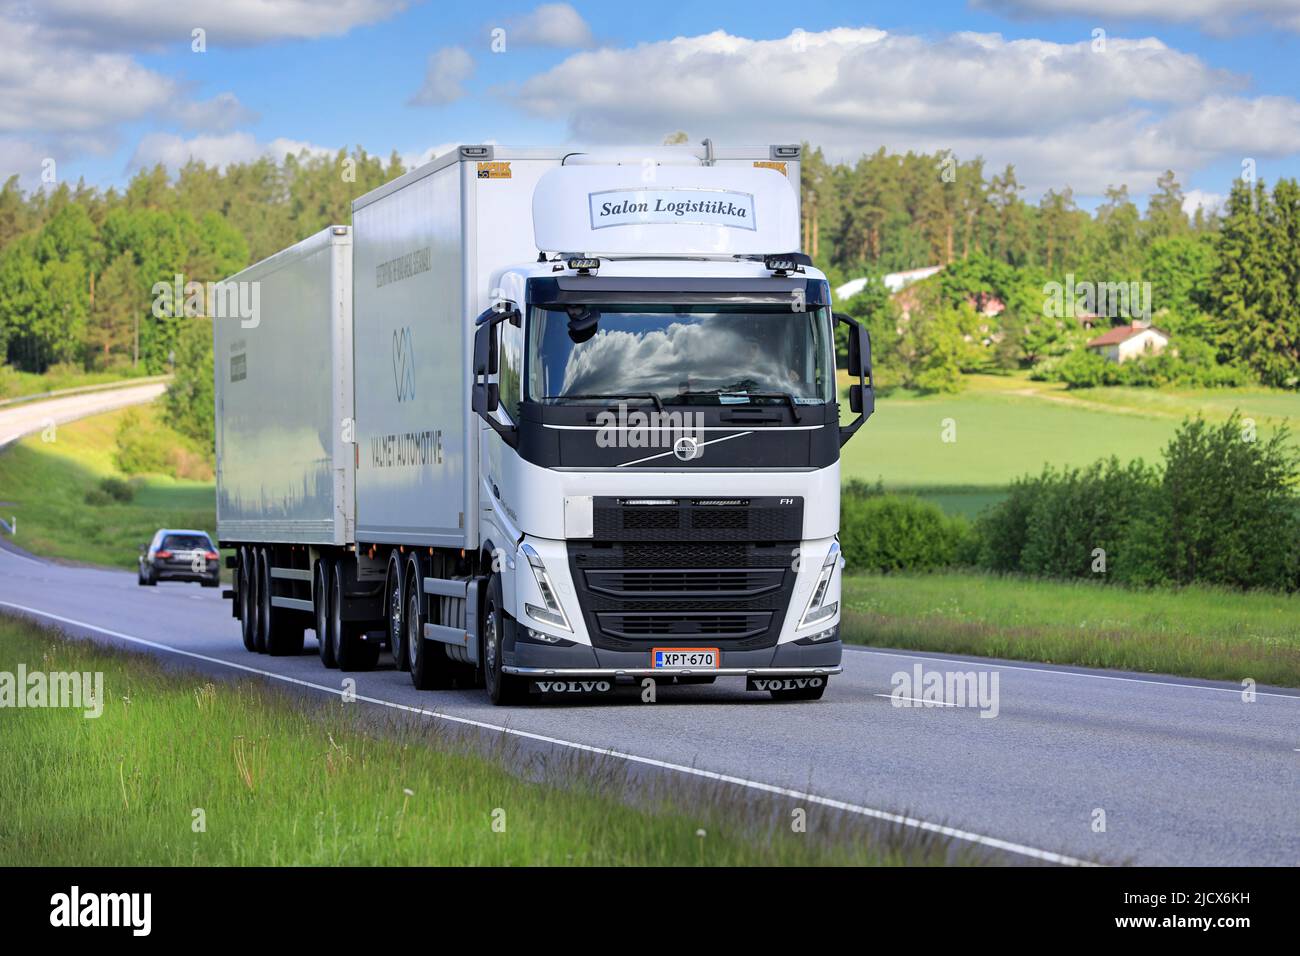 New, white Volvo FH truck Salon Logistiikka Ky pulls trailer along highway 52 on a day of summer. Salo, Finland. June 9, 2022. Stock Photo